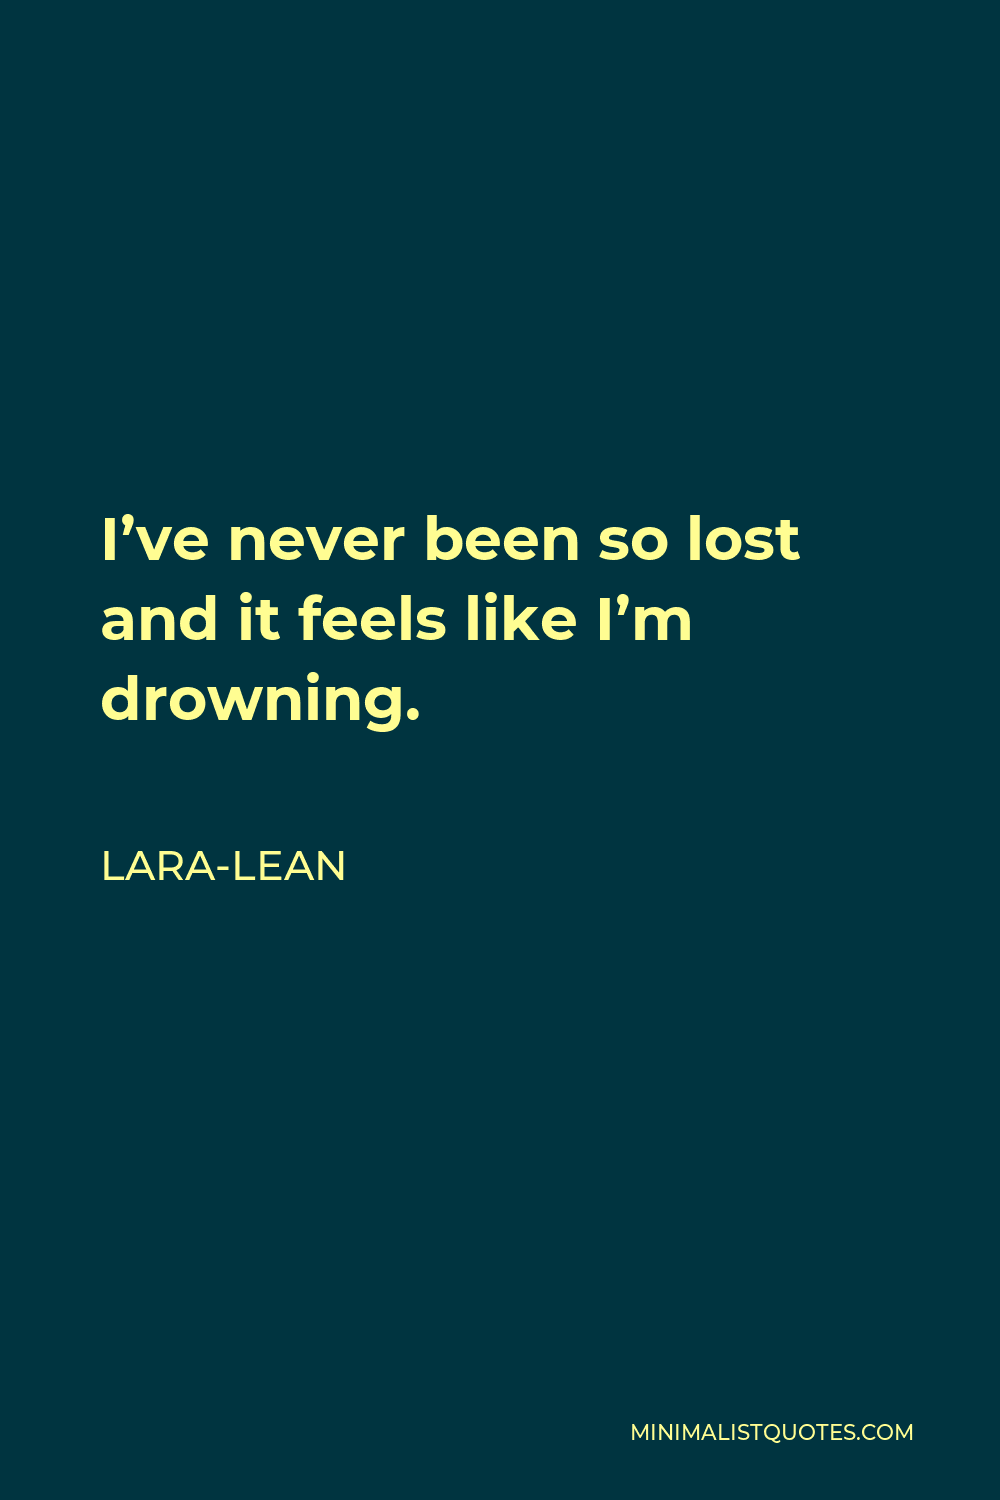 Lara-Lean Quote - I’ve never been so lost and it feels like I’m drowning.